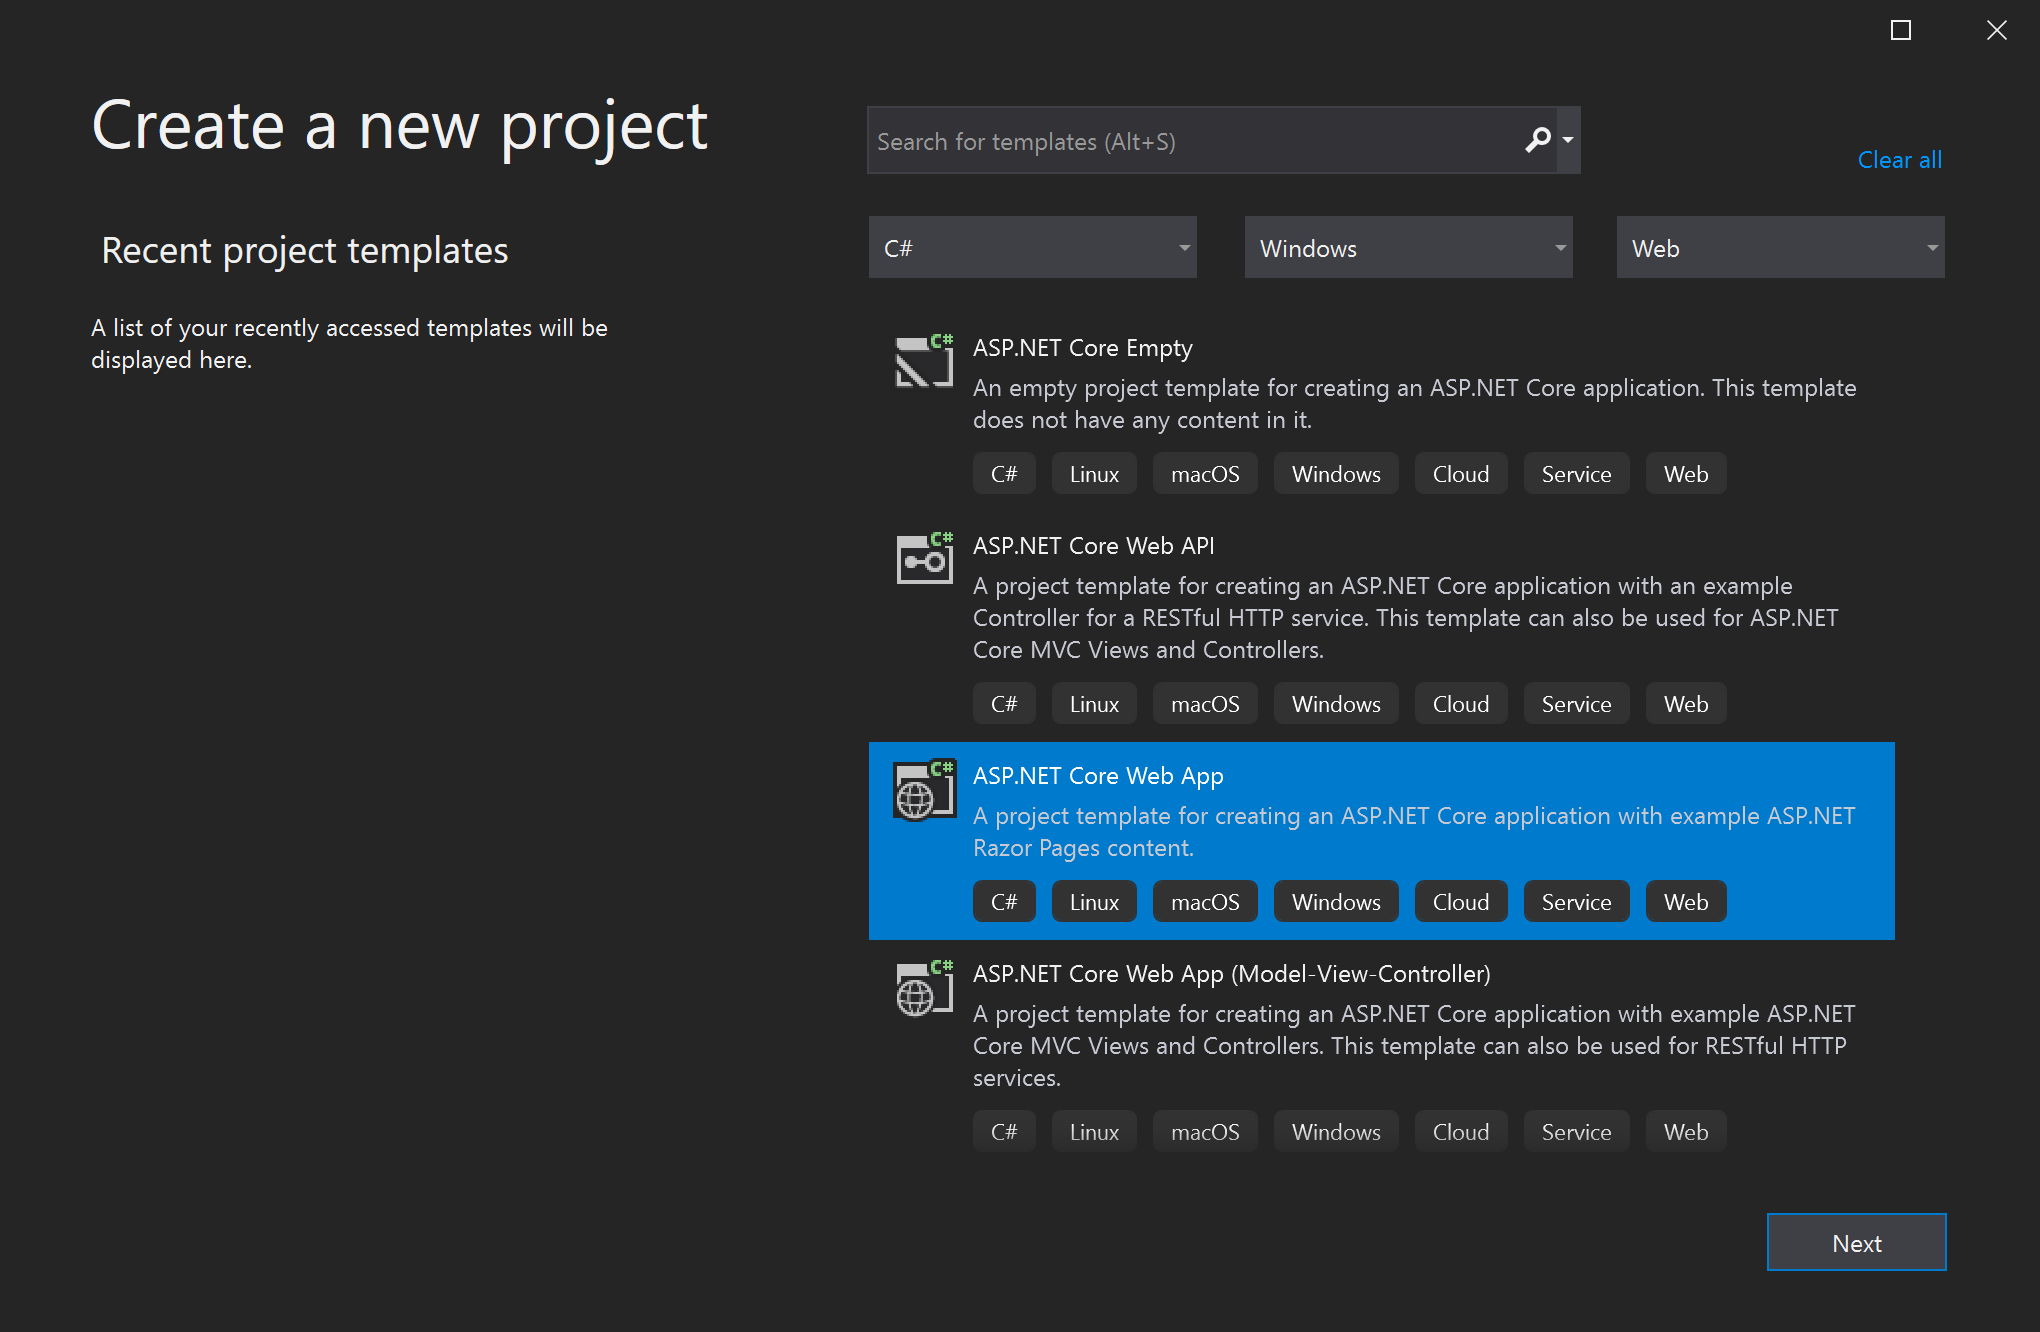 Screenshot shows the ASP.NET Core Web App project template highlighted in the New Project dialog box.